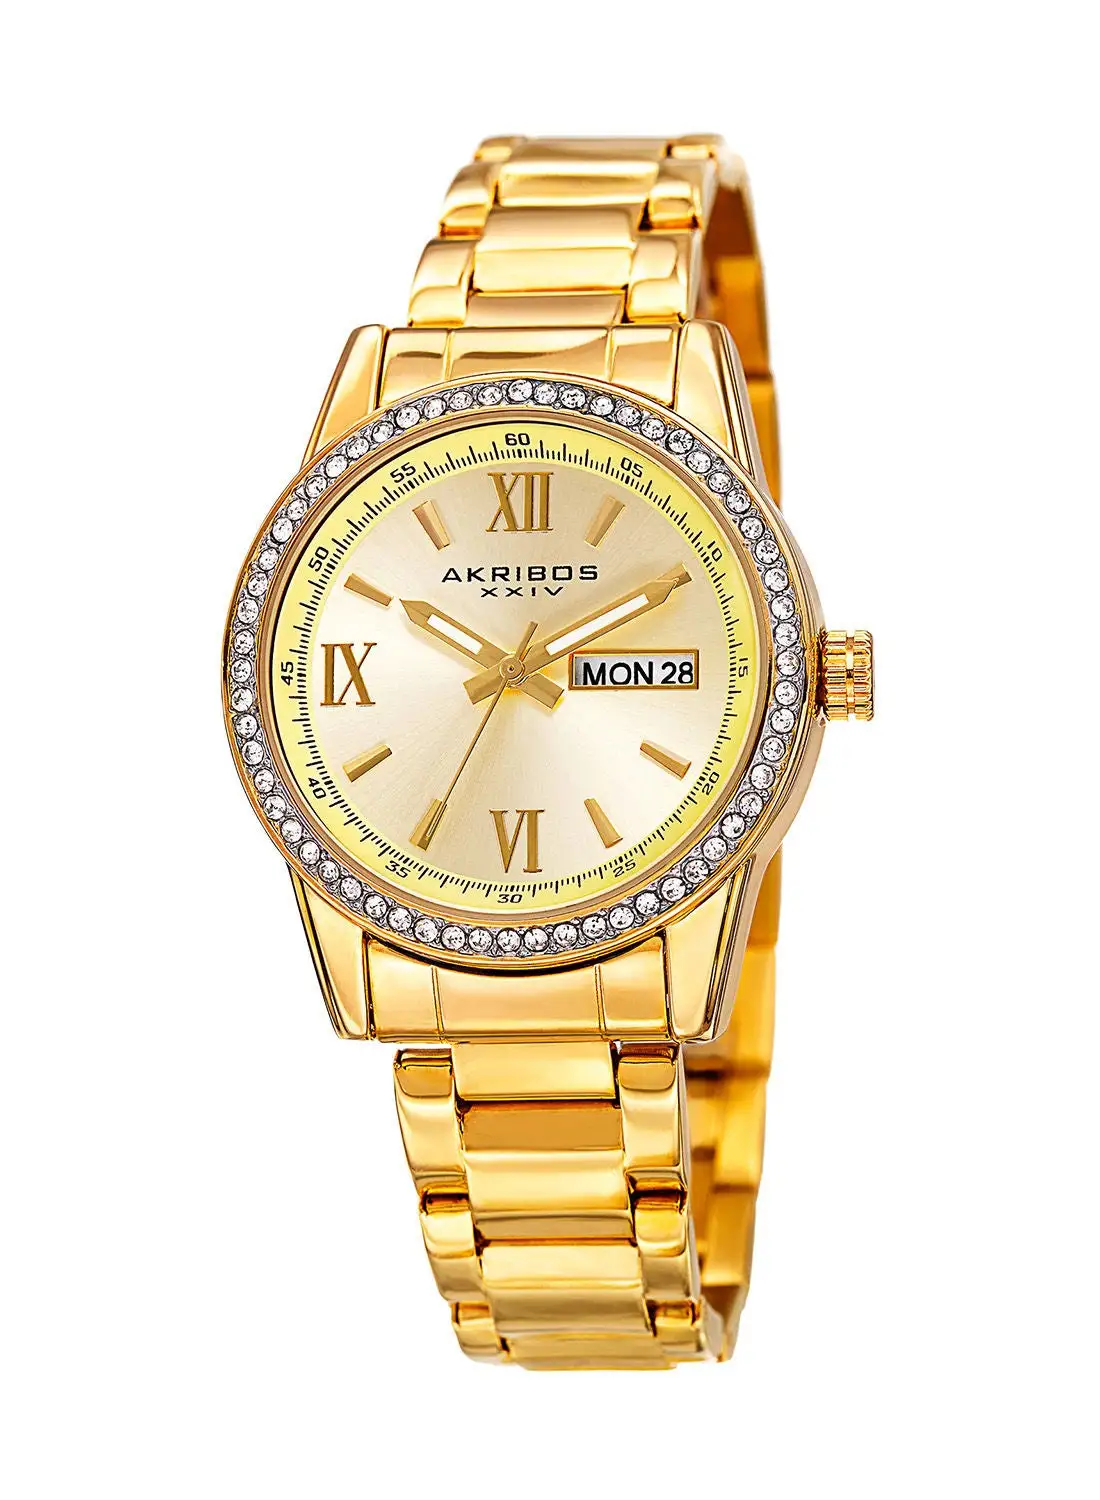 Akribos XXIV Gold Tone Case on Yellow Gold Bracelet, Yellow Gold Dial with Gold Tone Hands 